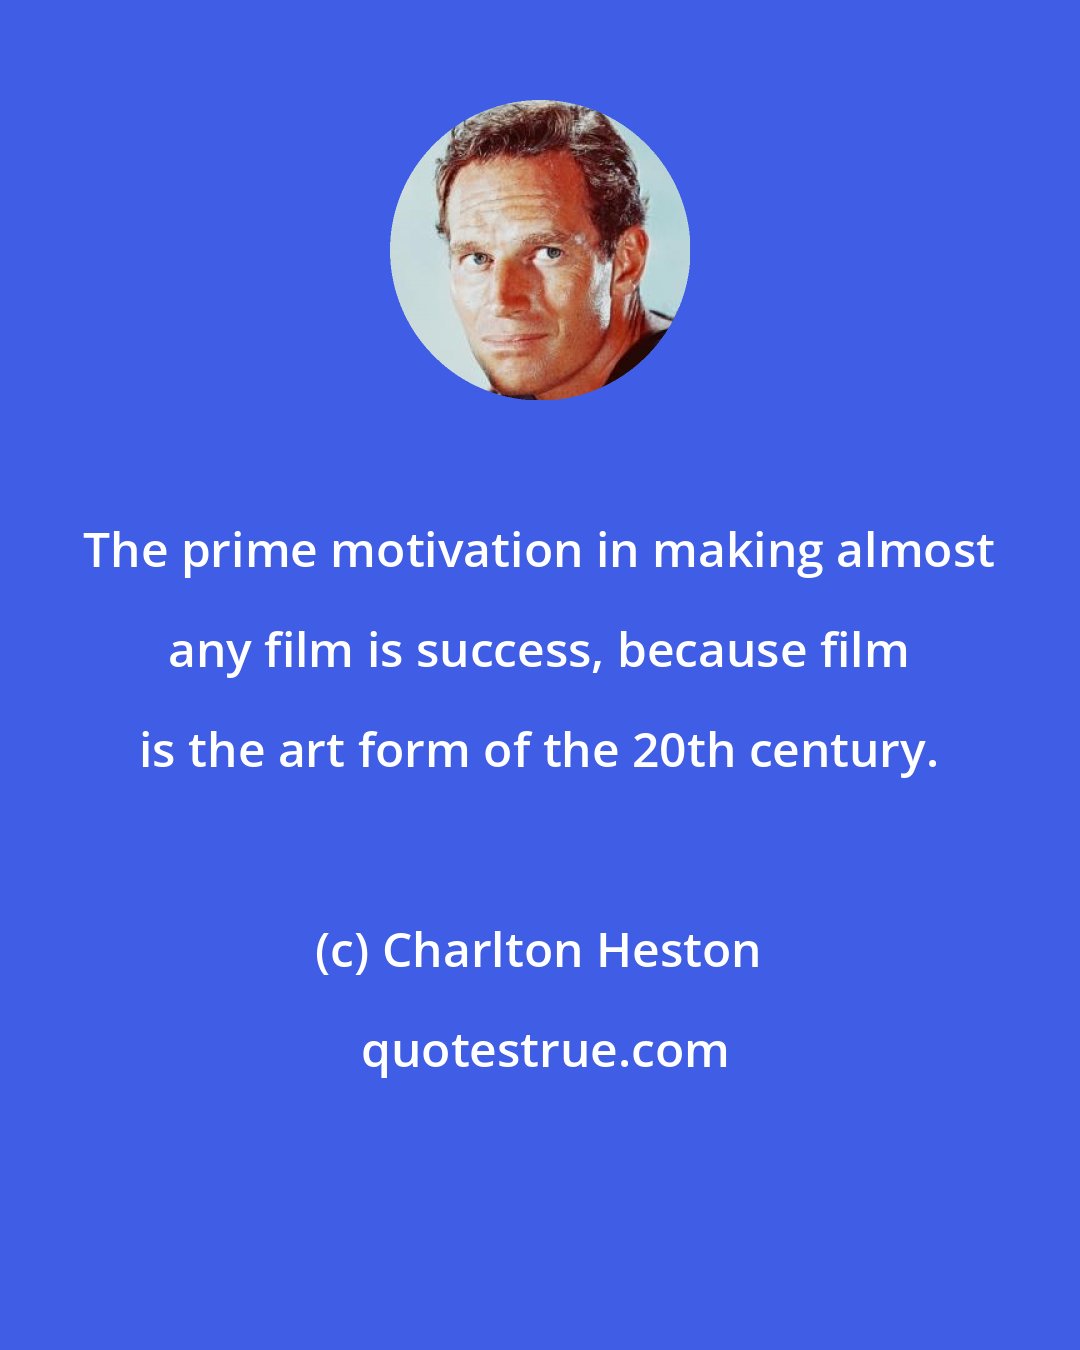 Charlton Heston: The prime motivation in making almost any film is success, because film is the art form of the 20th century.